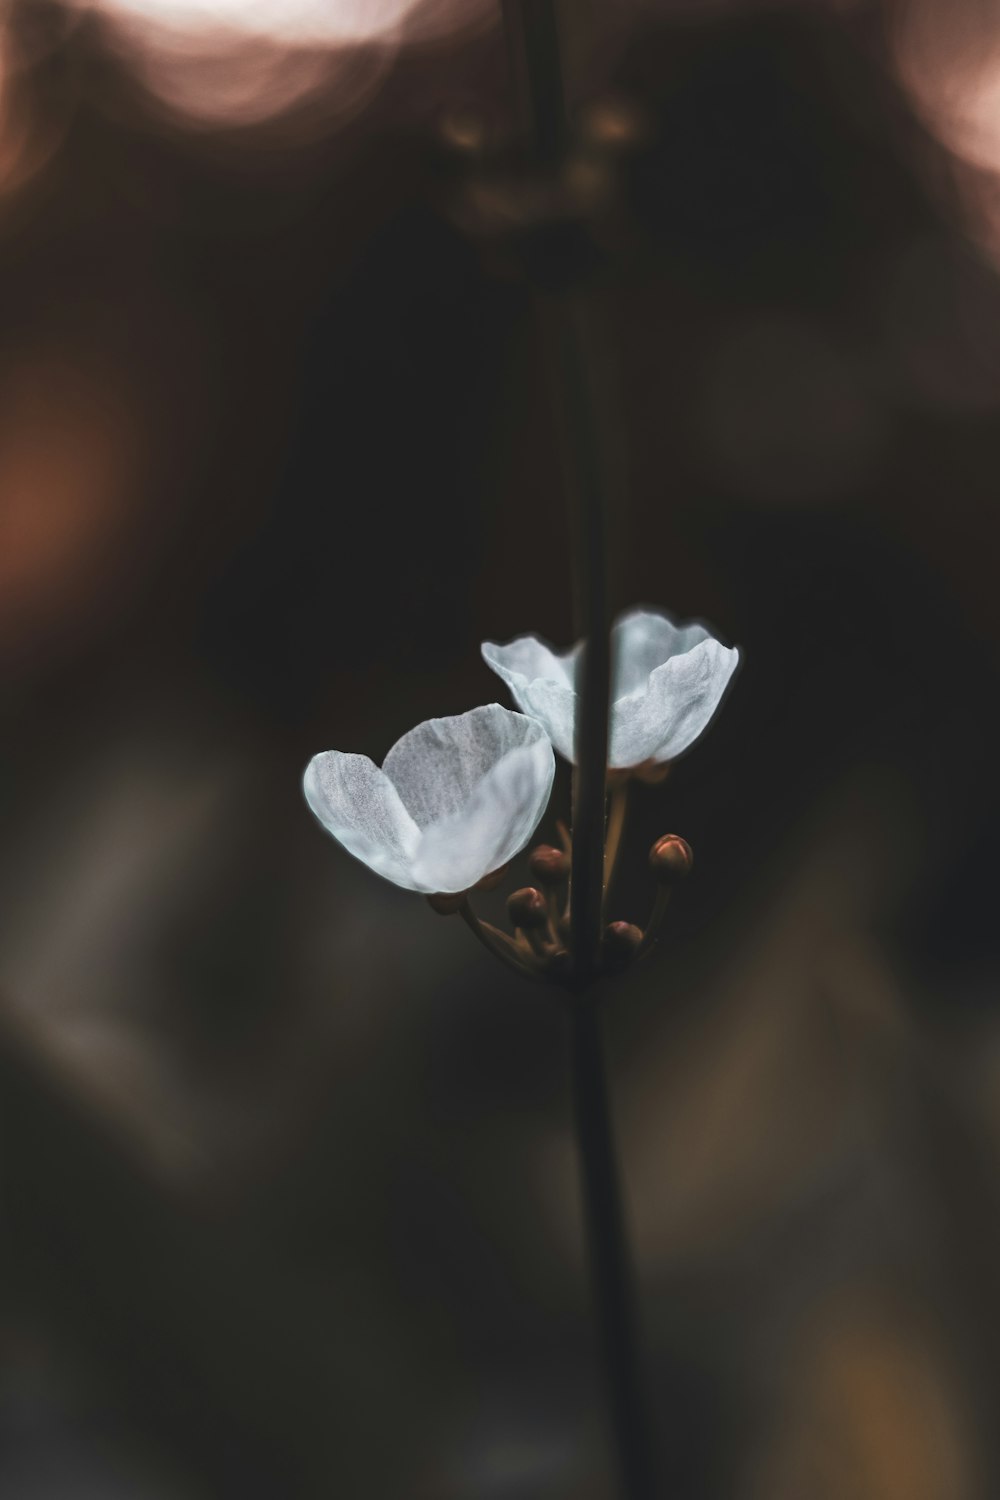 a single white flower with a blurry background